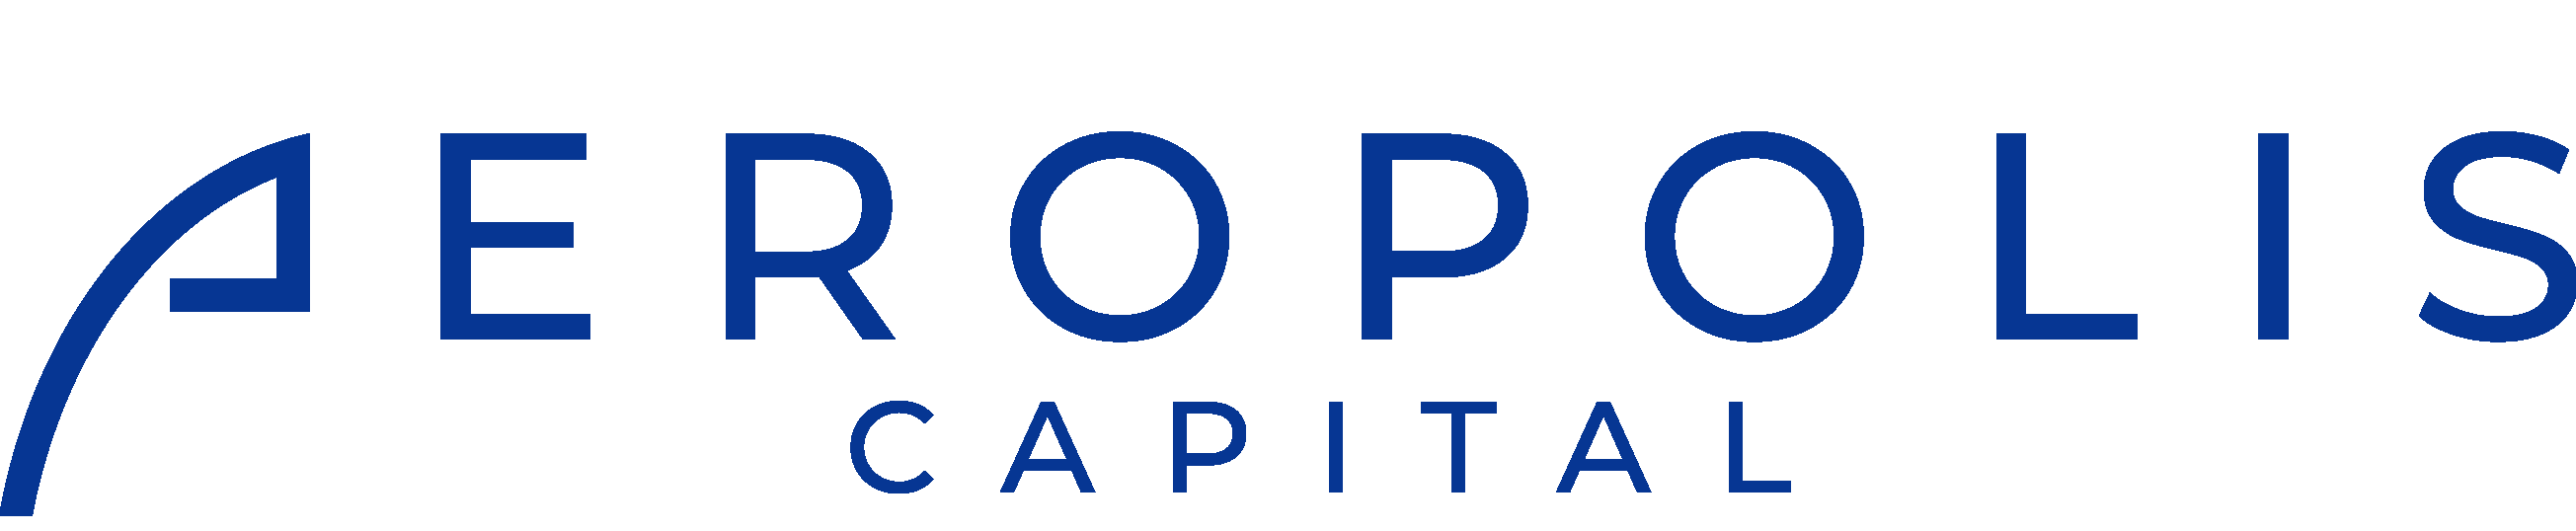 Aeropolis Capital, Aeropolis, Aeropolis Capital Corporation, Canada Exempt Market Dealer, Canada EMD, How to start an EMD, Security Token Offering Investors, Deal Flow, Security Token Offering, Initial Exchange Offering, Initial Coin Offering, Family Office, High-Net Worth Individuals, Oil and Gas, Infrastructure, Blockchain, AI, Emerging Markets, Investment Banking, Private Equity, Venture Capital, Mezzanine Funding, Debt Financing, Equity Financing, Bridge Financing, Convertible Notes, IEO, STO, ICO, IDO, Private Banking, Decentralized, Broker-Dealer, Broker, Dealer, Issuance, Private Markets, Capital Markets, Fundraising, Fundraiser, Funding, VC, Investor, Angel, Institution, Syndication, Launchpad, STO Investor List of STO VC's STO Family Offices and STO Angel Investors - STO Investor Introductions, Solar Purchase Orders, Purchase Order Finance, Solar EPC, PPE Purchase Order, PPE Purchase Order Finance, Solar PV Purchase Order, FOB purchase order factoring, invoice factoring, global purchase order, global invoice factoring, equipment financing, global broker dealer